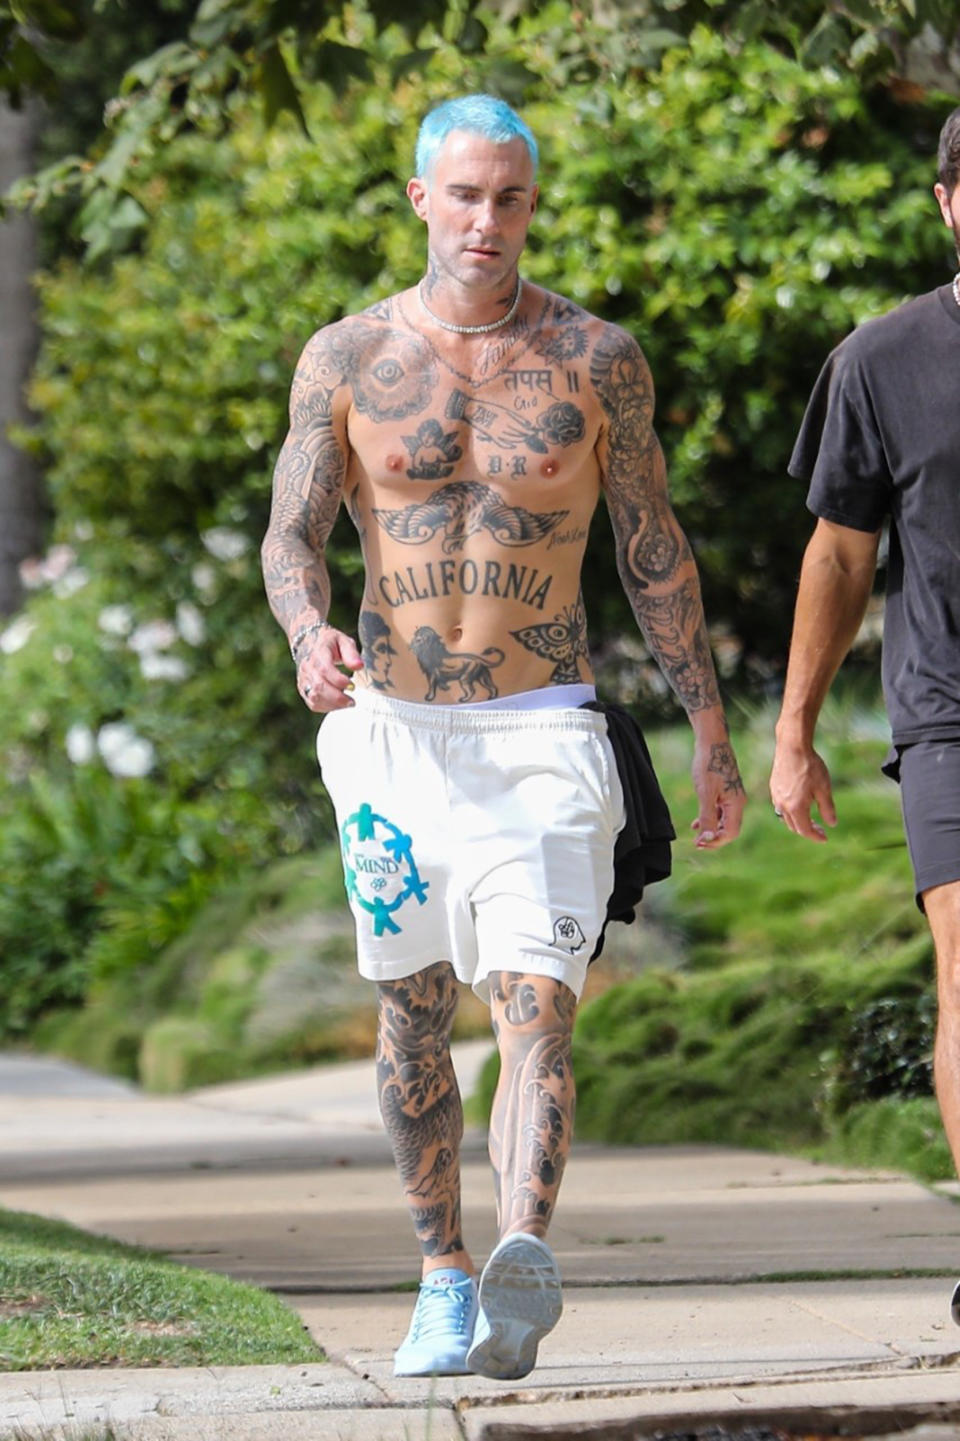 Adam Levine debuted bright blue hair while walking in Los Angeles on Monday. (Backgrid)